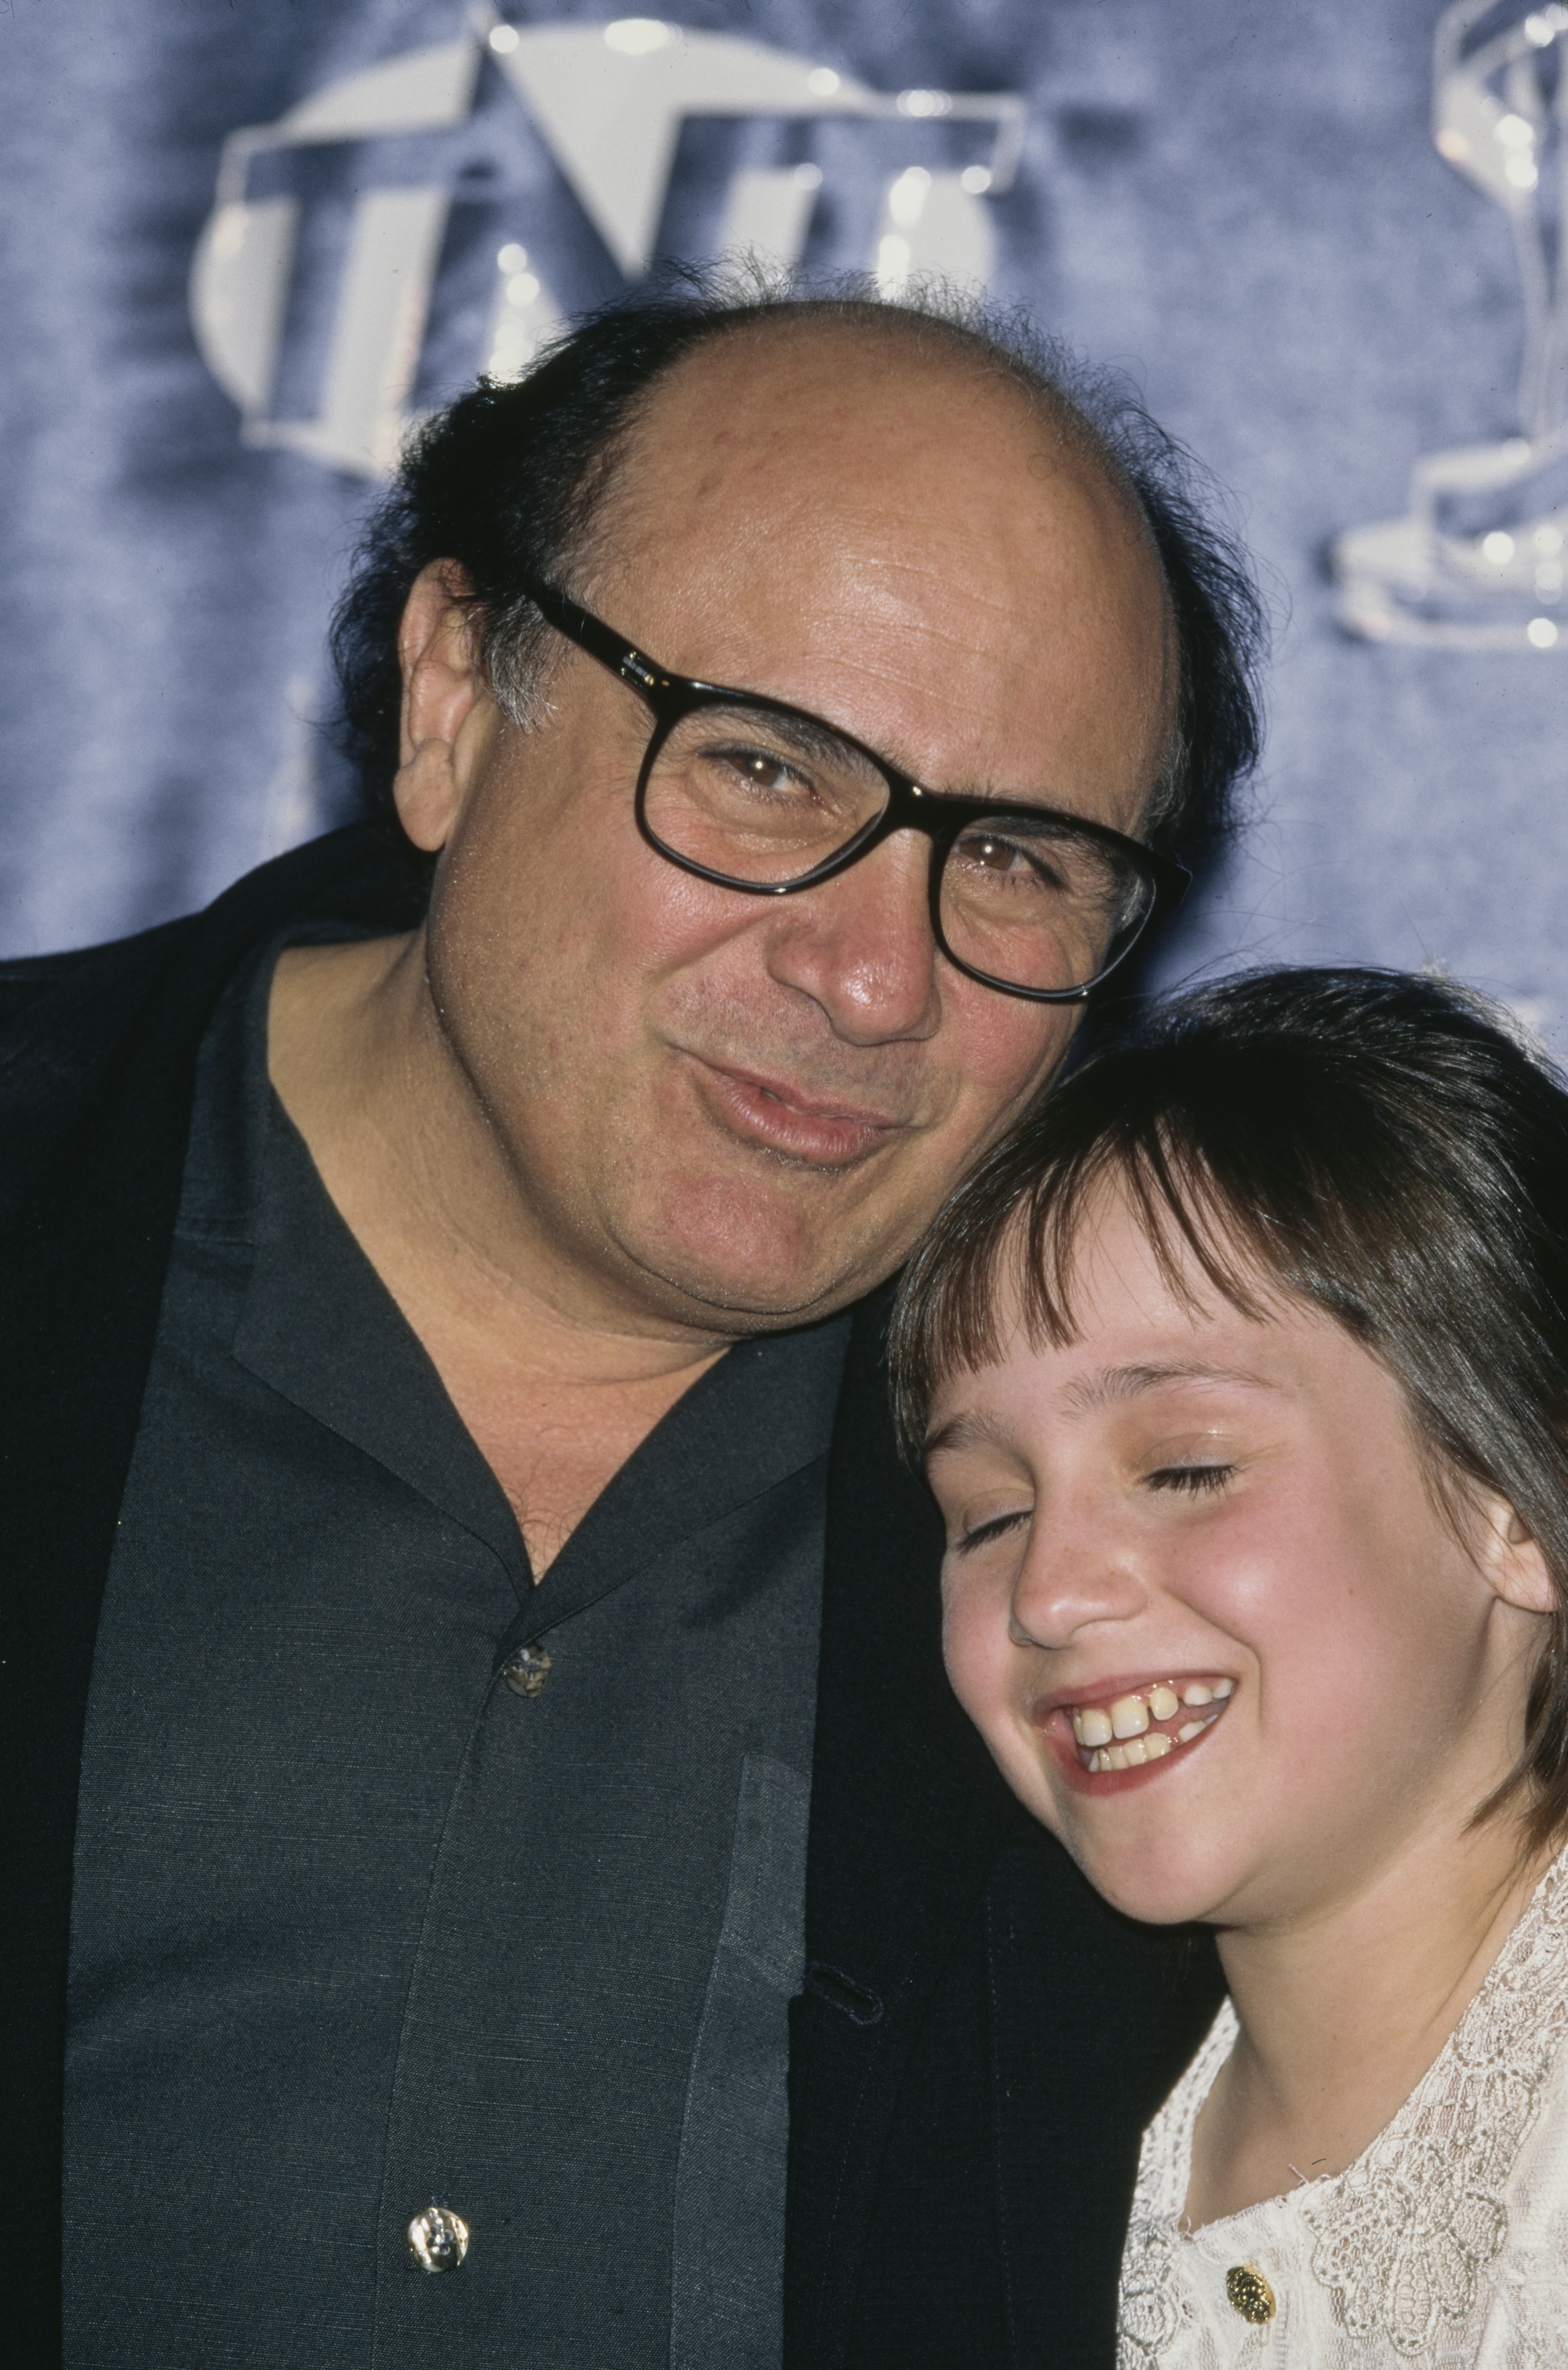 Danny DeVito and Mara Wilson attend the 1997 ShoWest Awards at the MGM Grand Hotel on March 6, 1997 in Las Vegas, Nevada. | Source: Getty Images